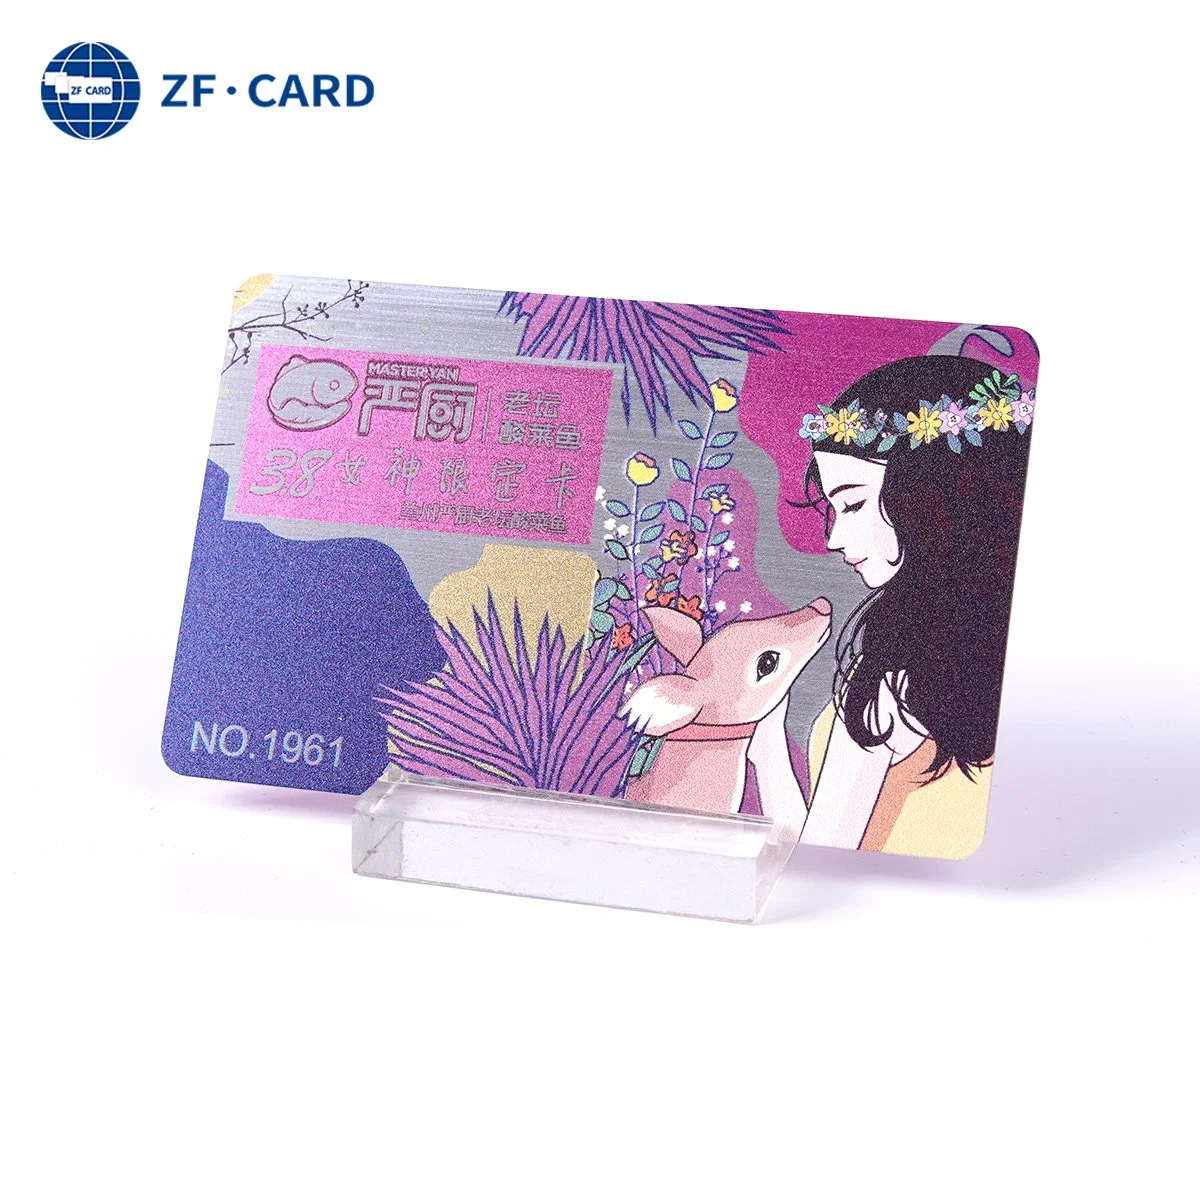 ISO 14443A 13.56MHz MIFARE 1K F08 Contactless IC Smart Cards